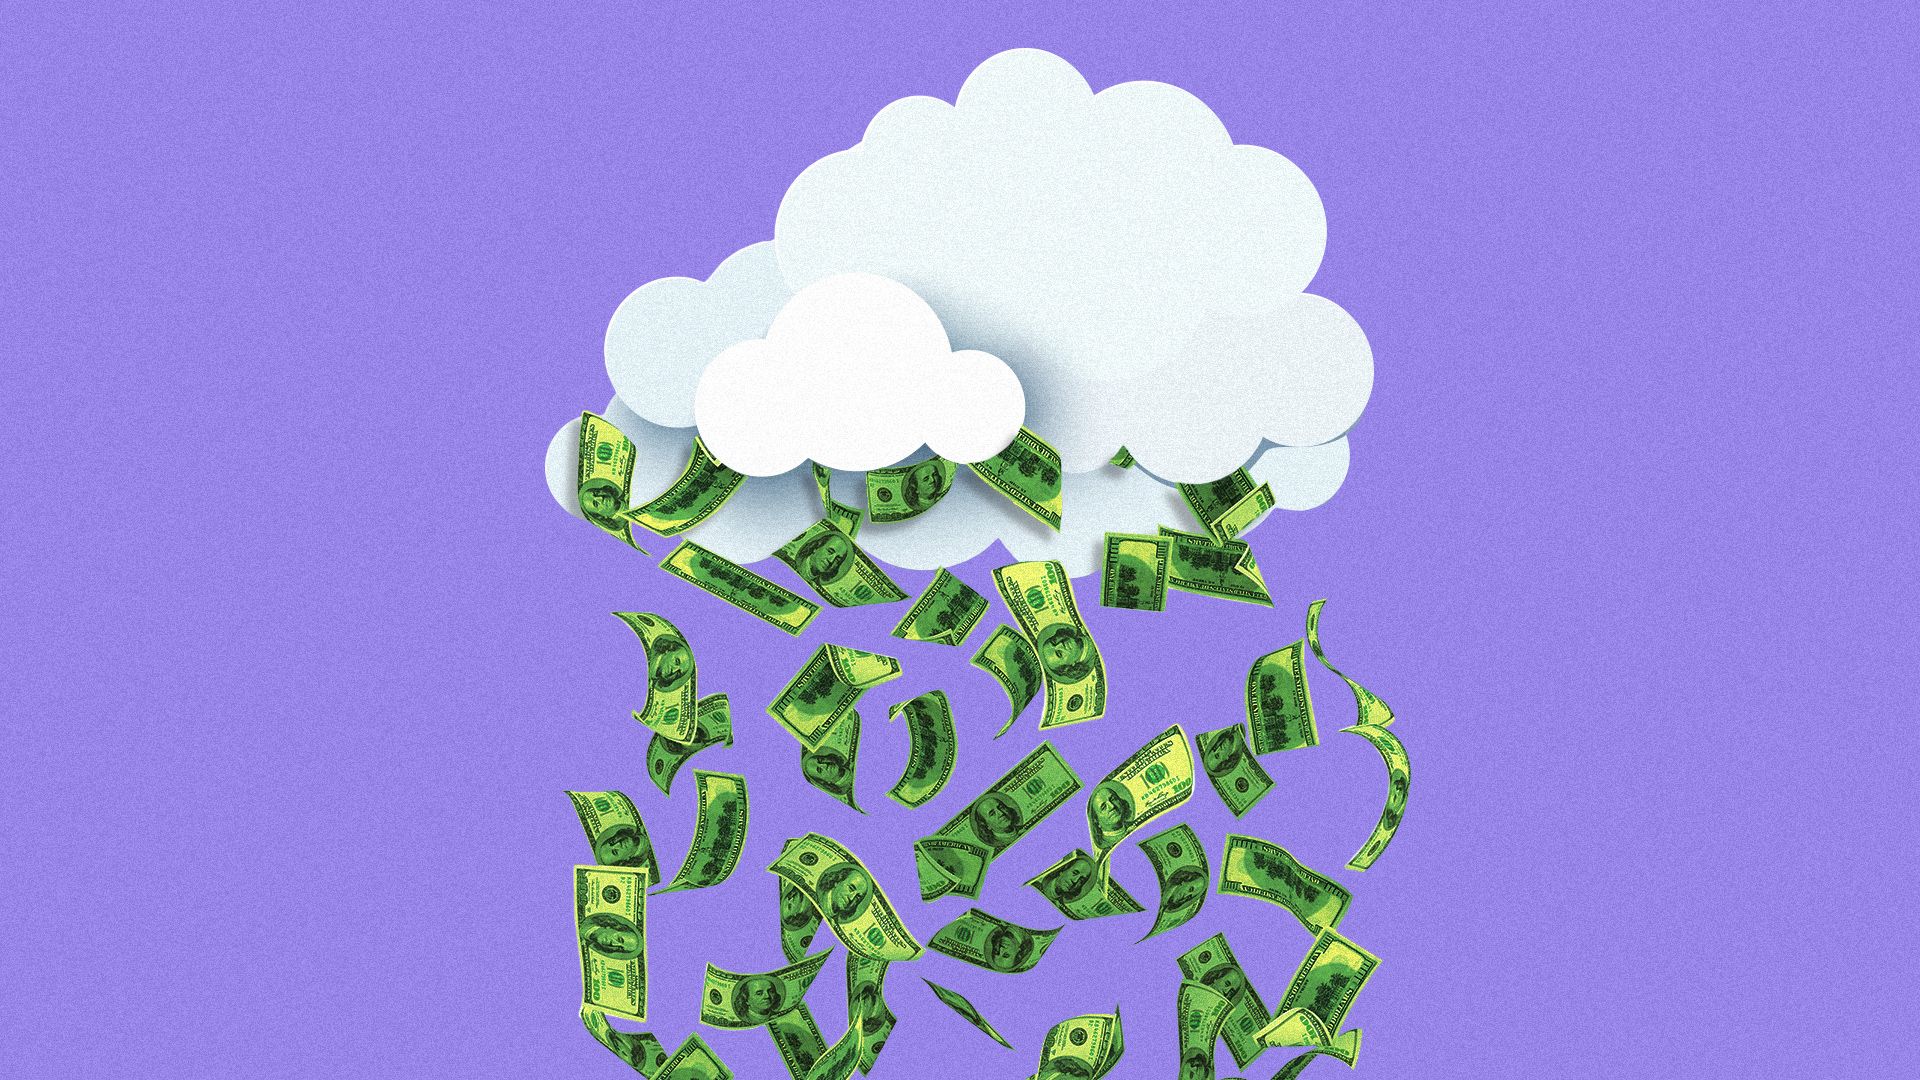 Illustration of money falling out of a cloud